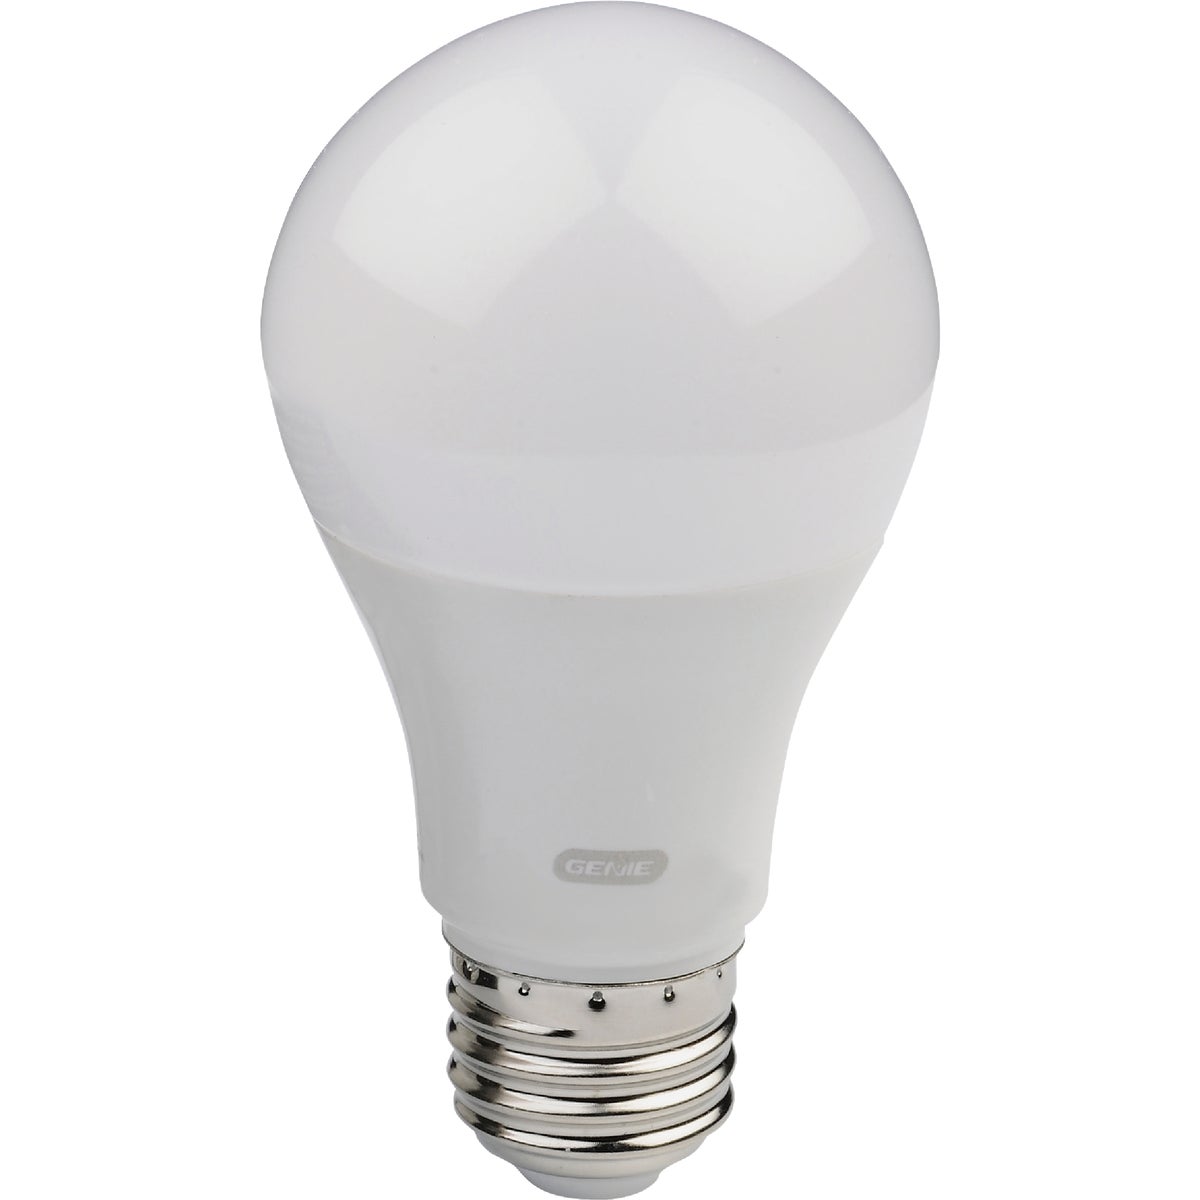 Item 100791, Standard LED light bulbs can create significant interference between your 